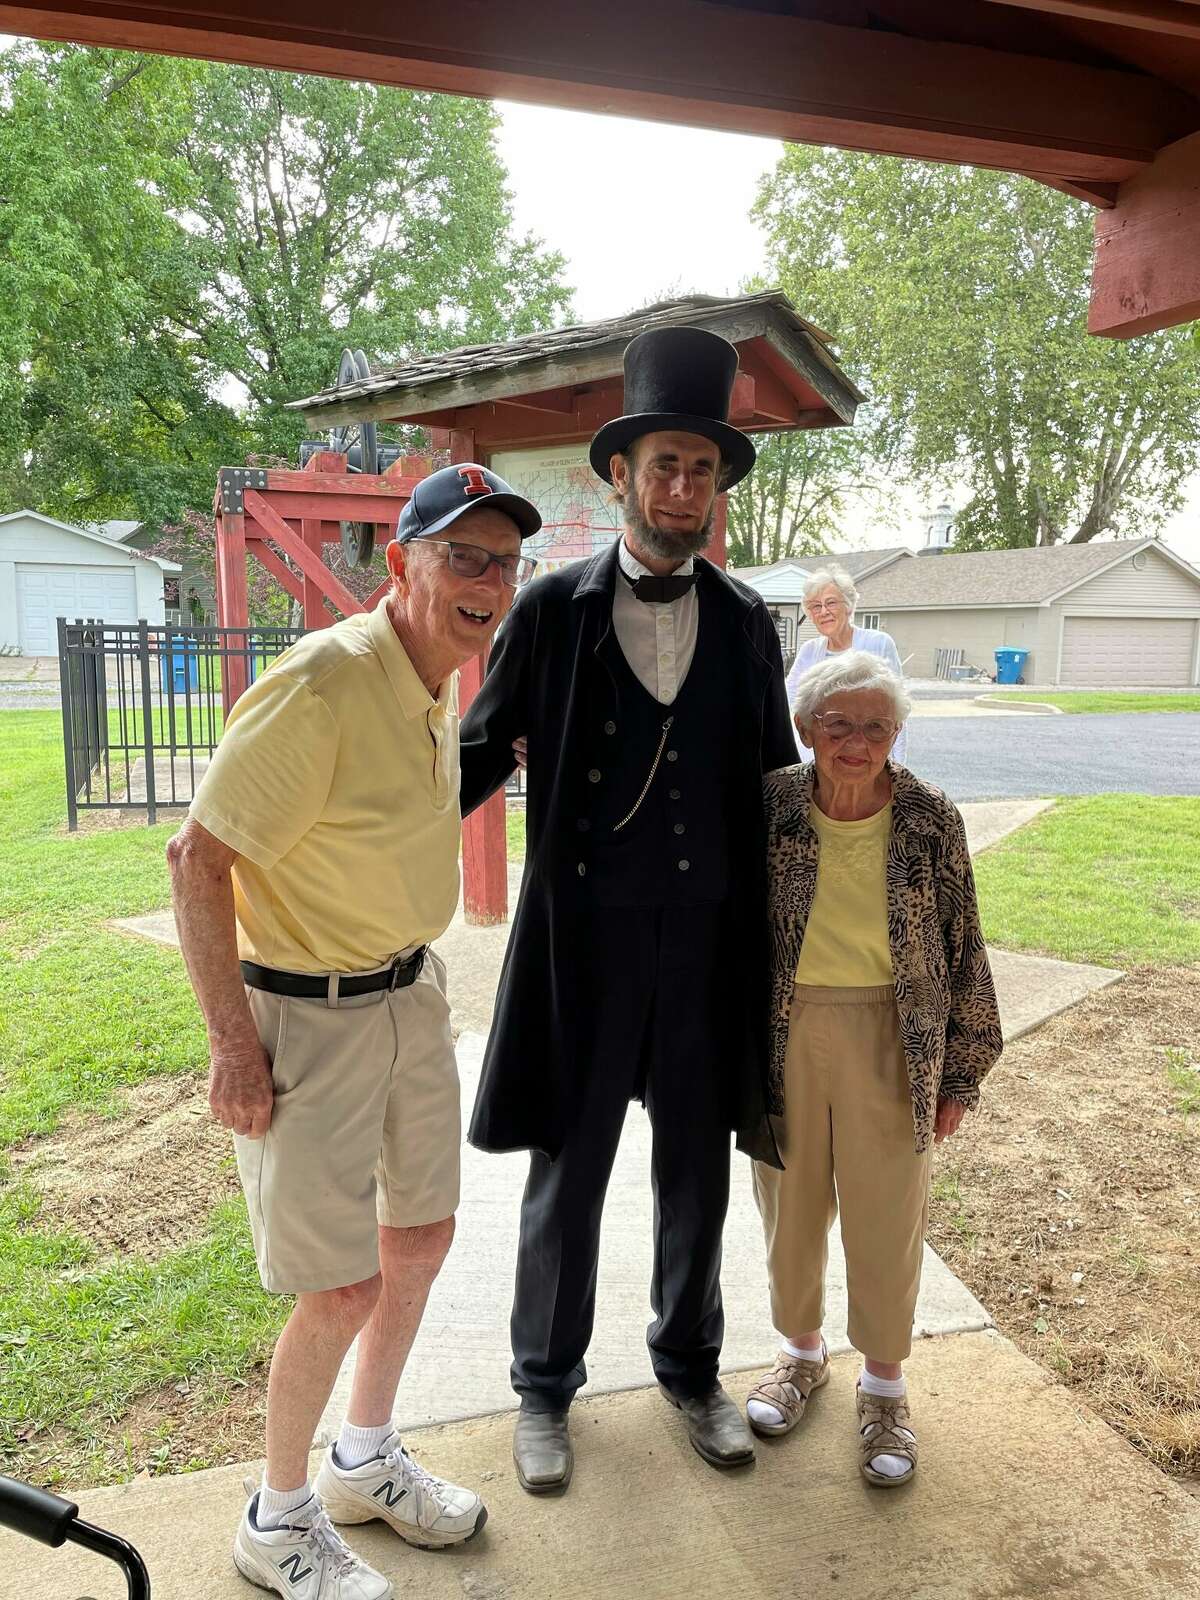 Former Glen Carbon Mayor Ron Foster, left, with his wife, Joan Foster, and an Abraham Lincoln re-enactor.